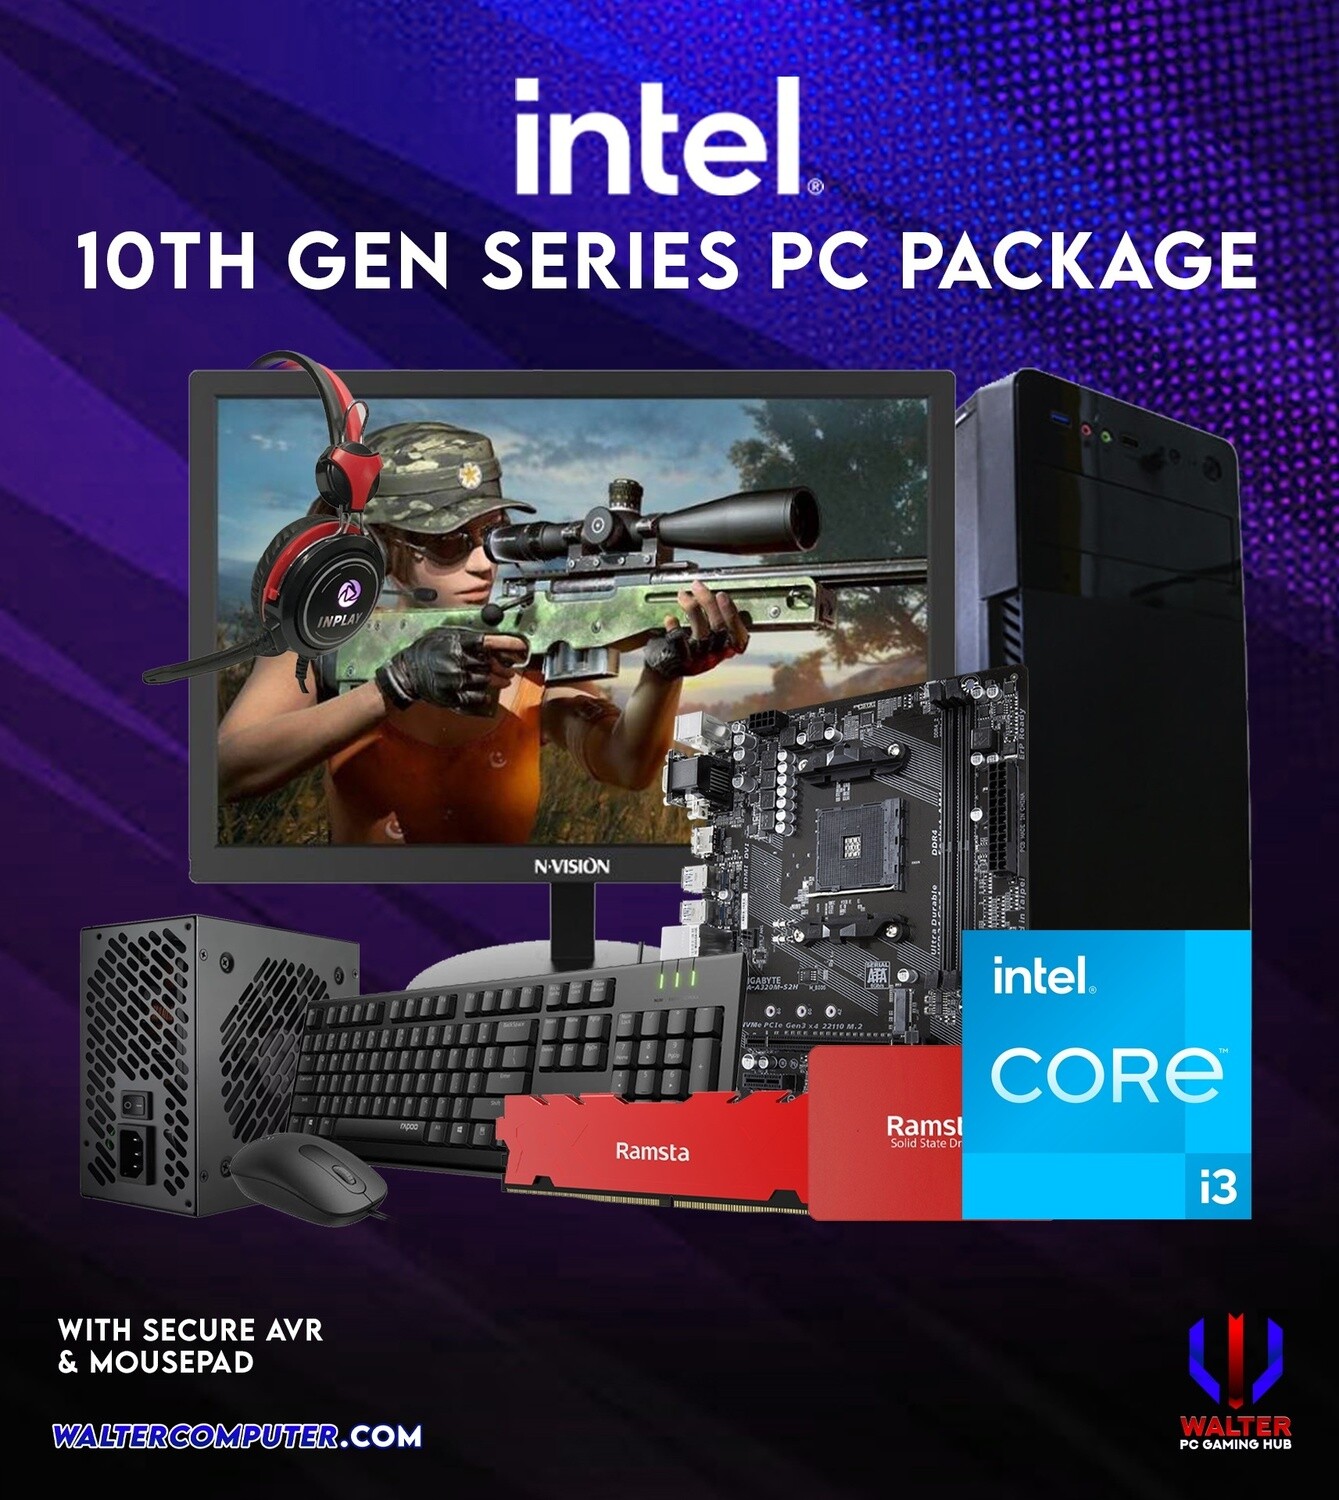 PC Package 12 Intel Core i3-10100